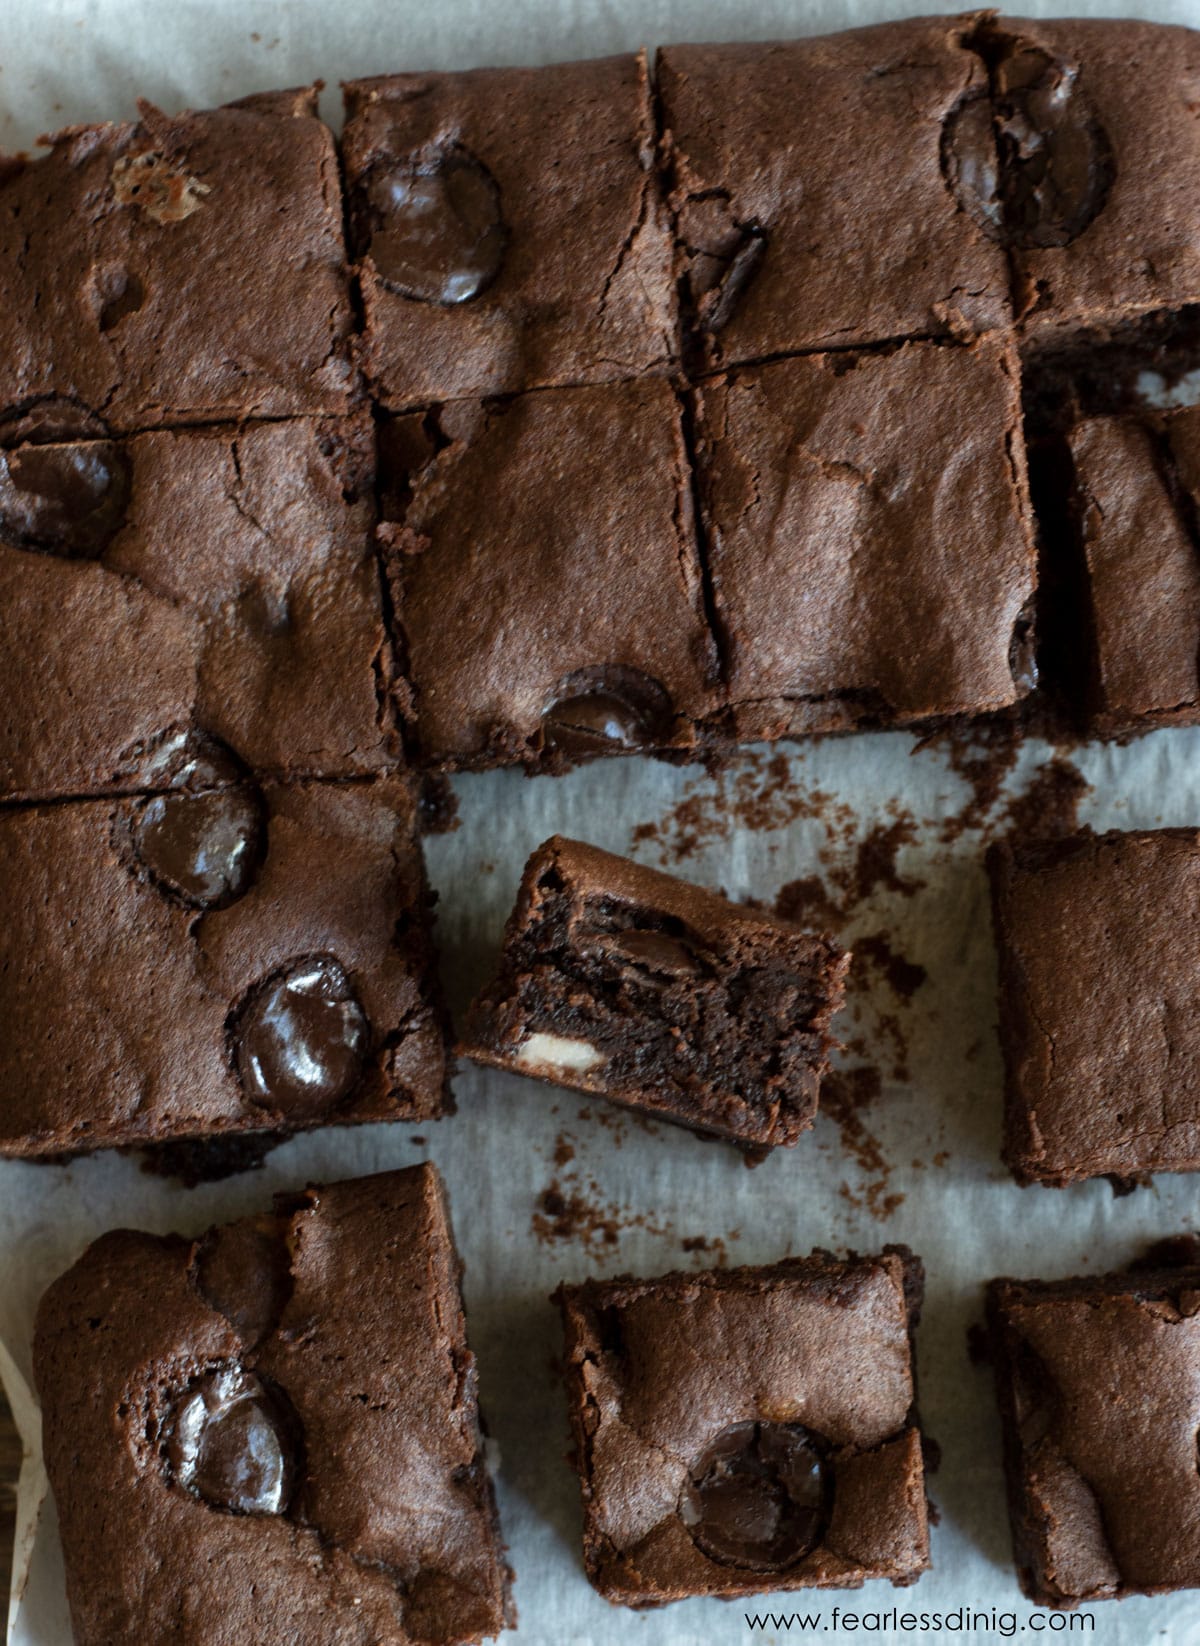 The sliced brownies on the tray.